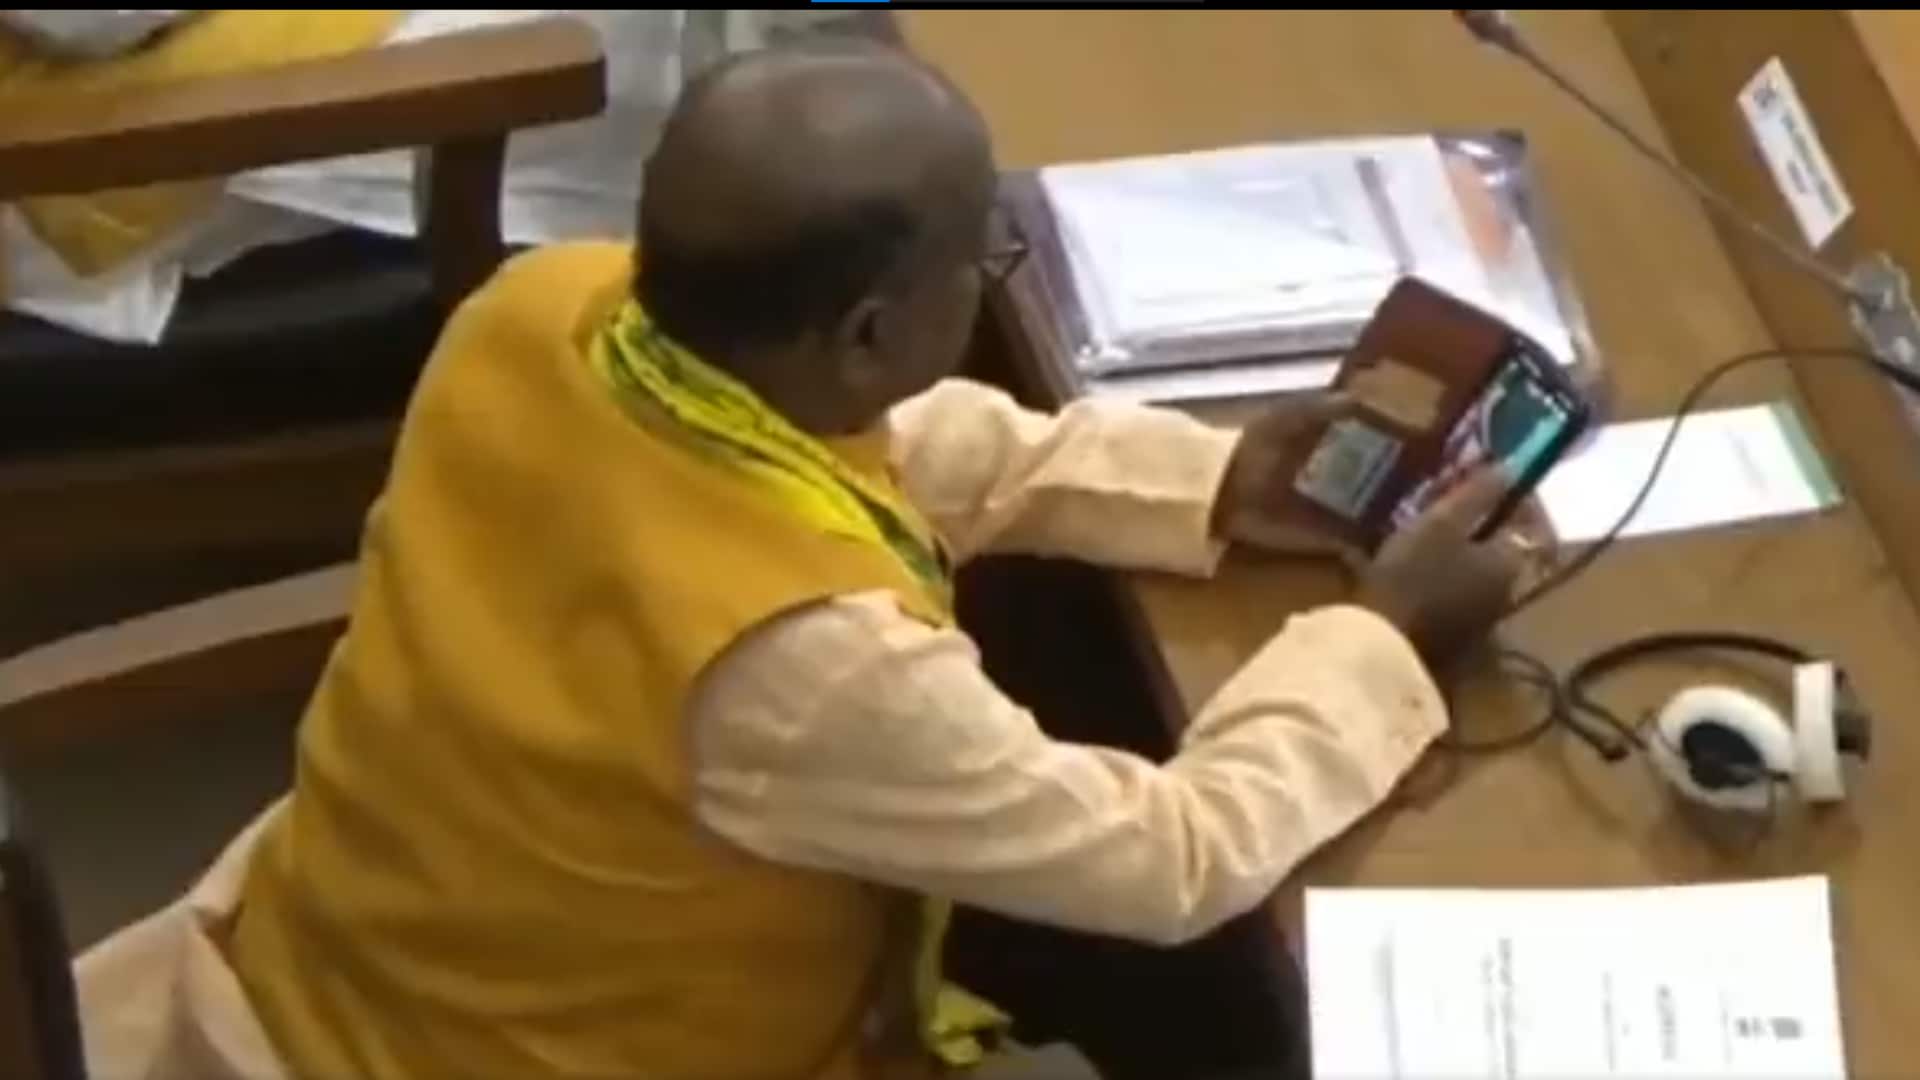 Tripura: BJP MLA caught on camera watching porn in Assembly